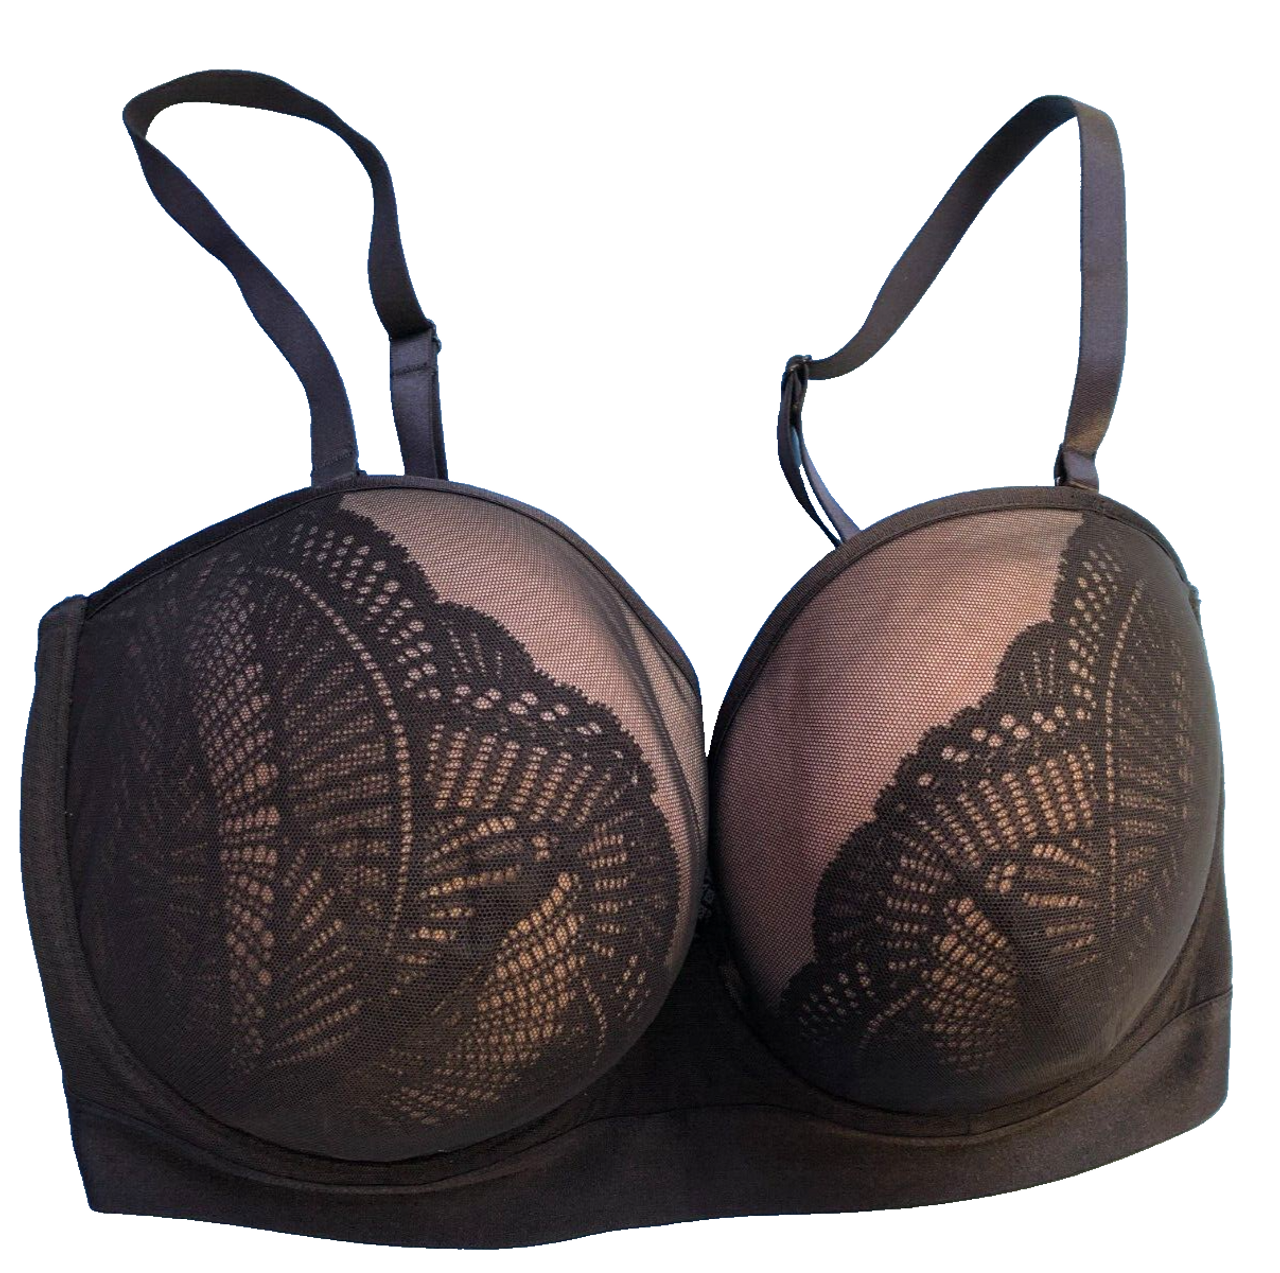 M&S Bra 36E Black Memory Foam Underwired Plunge Balcony New with Tags -  Against Breast Cancer